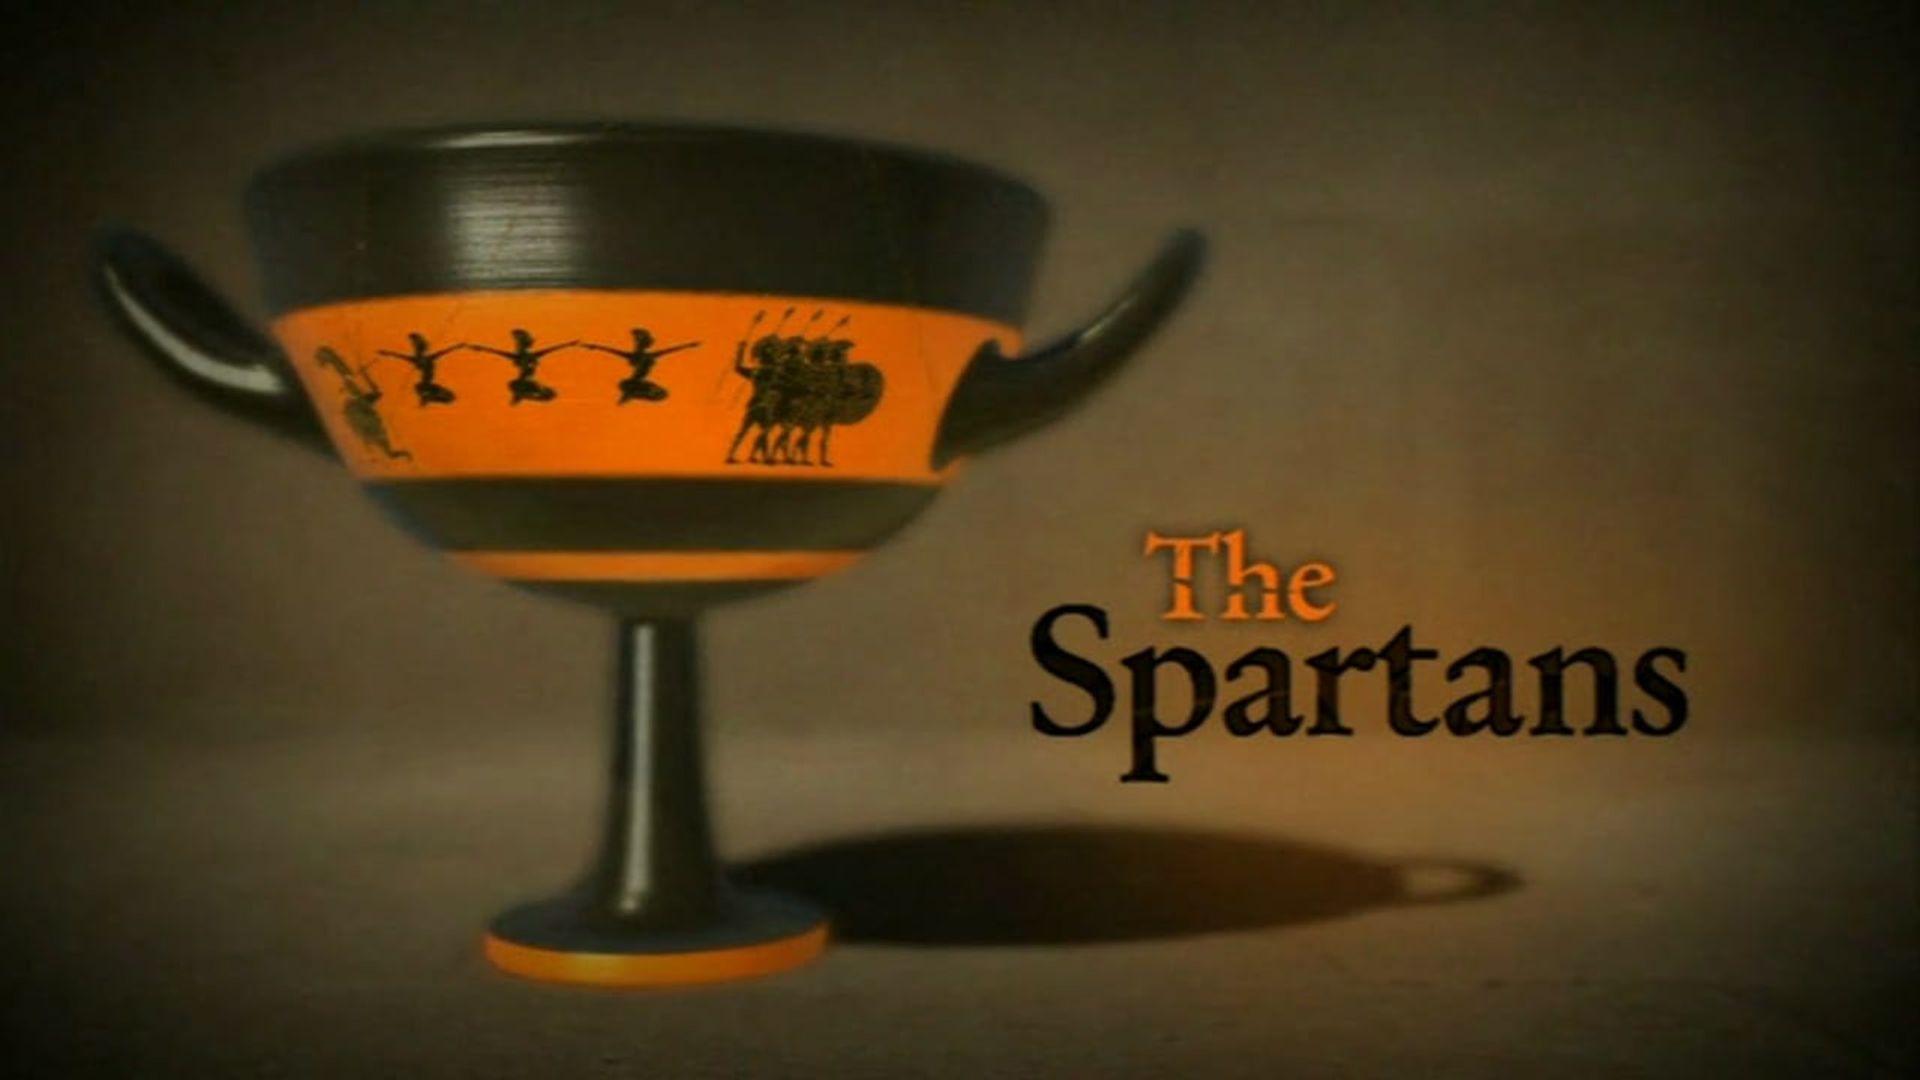 The Spartans background